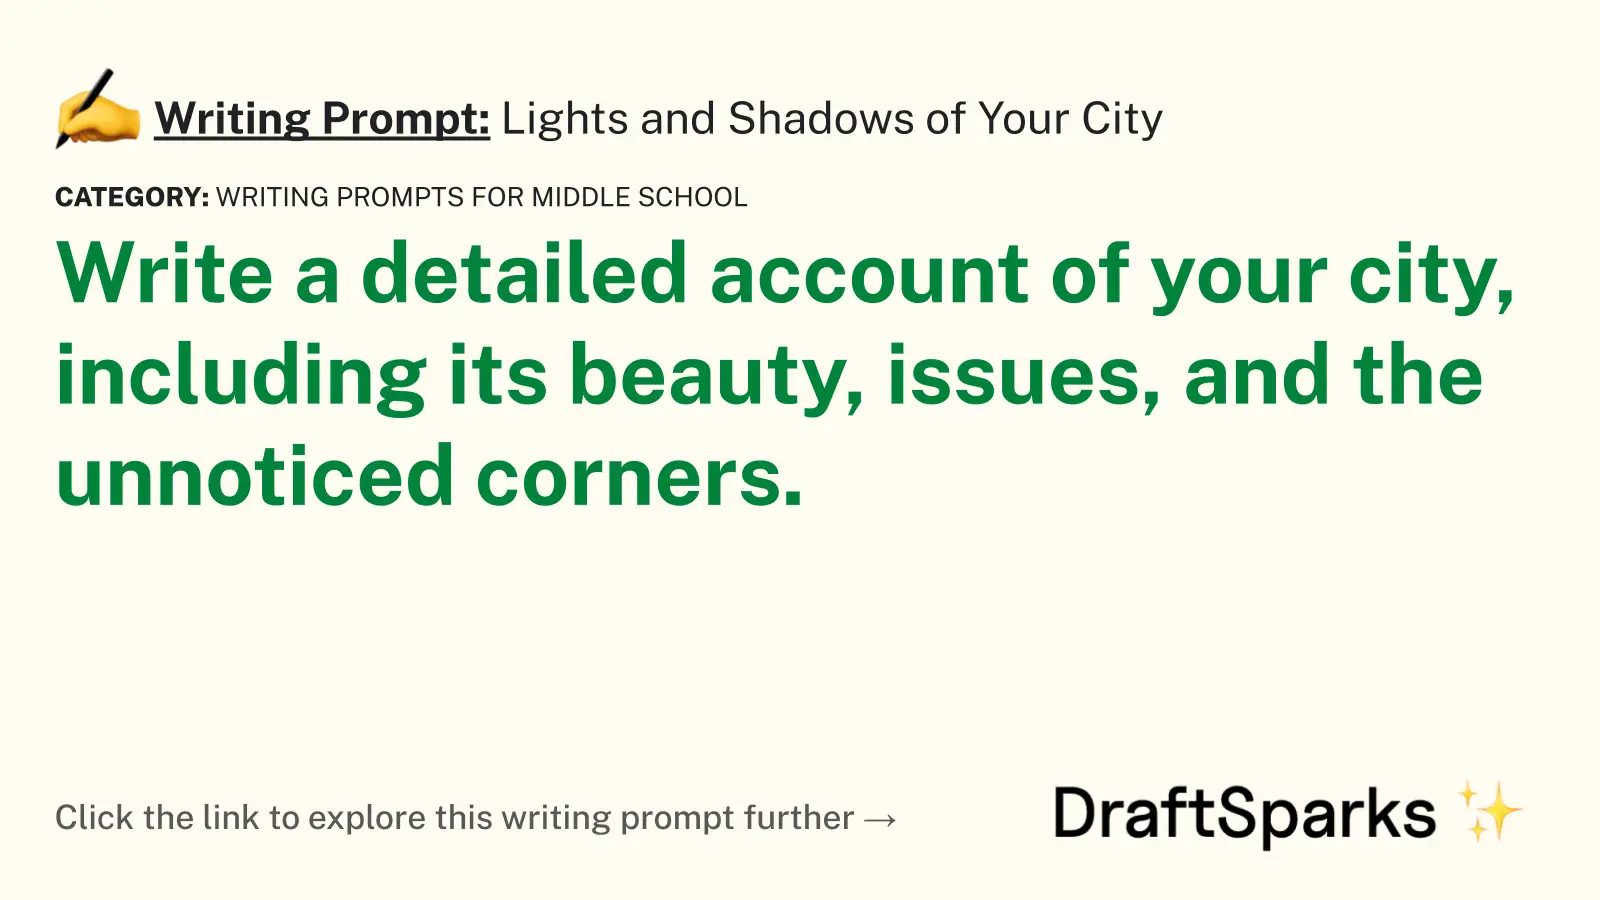 Lights and Shadows of Your City